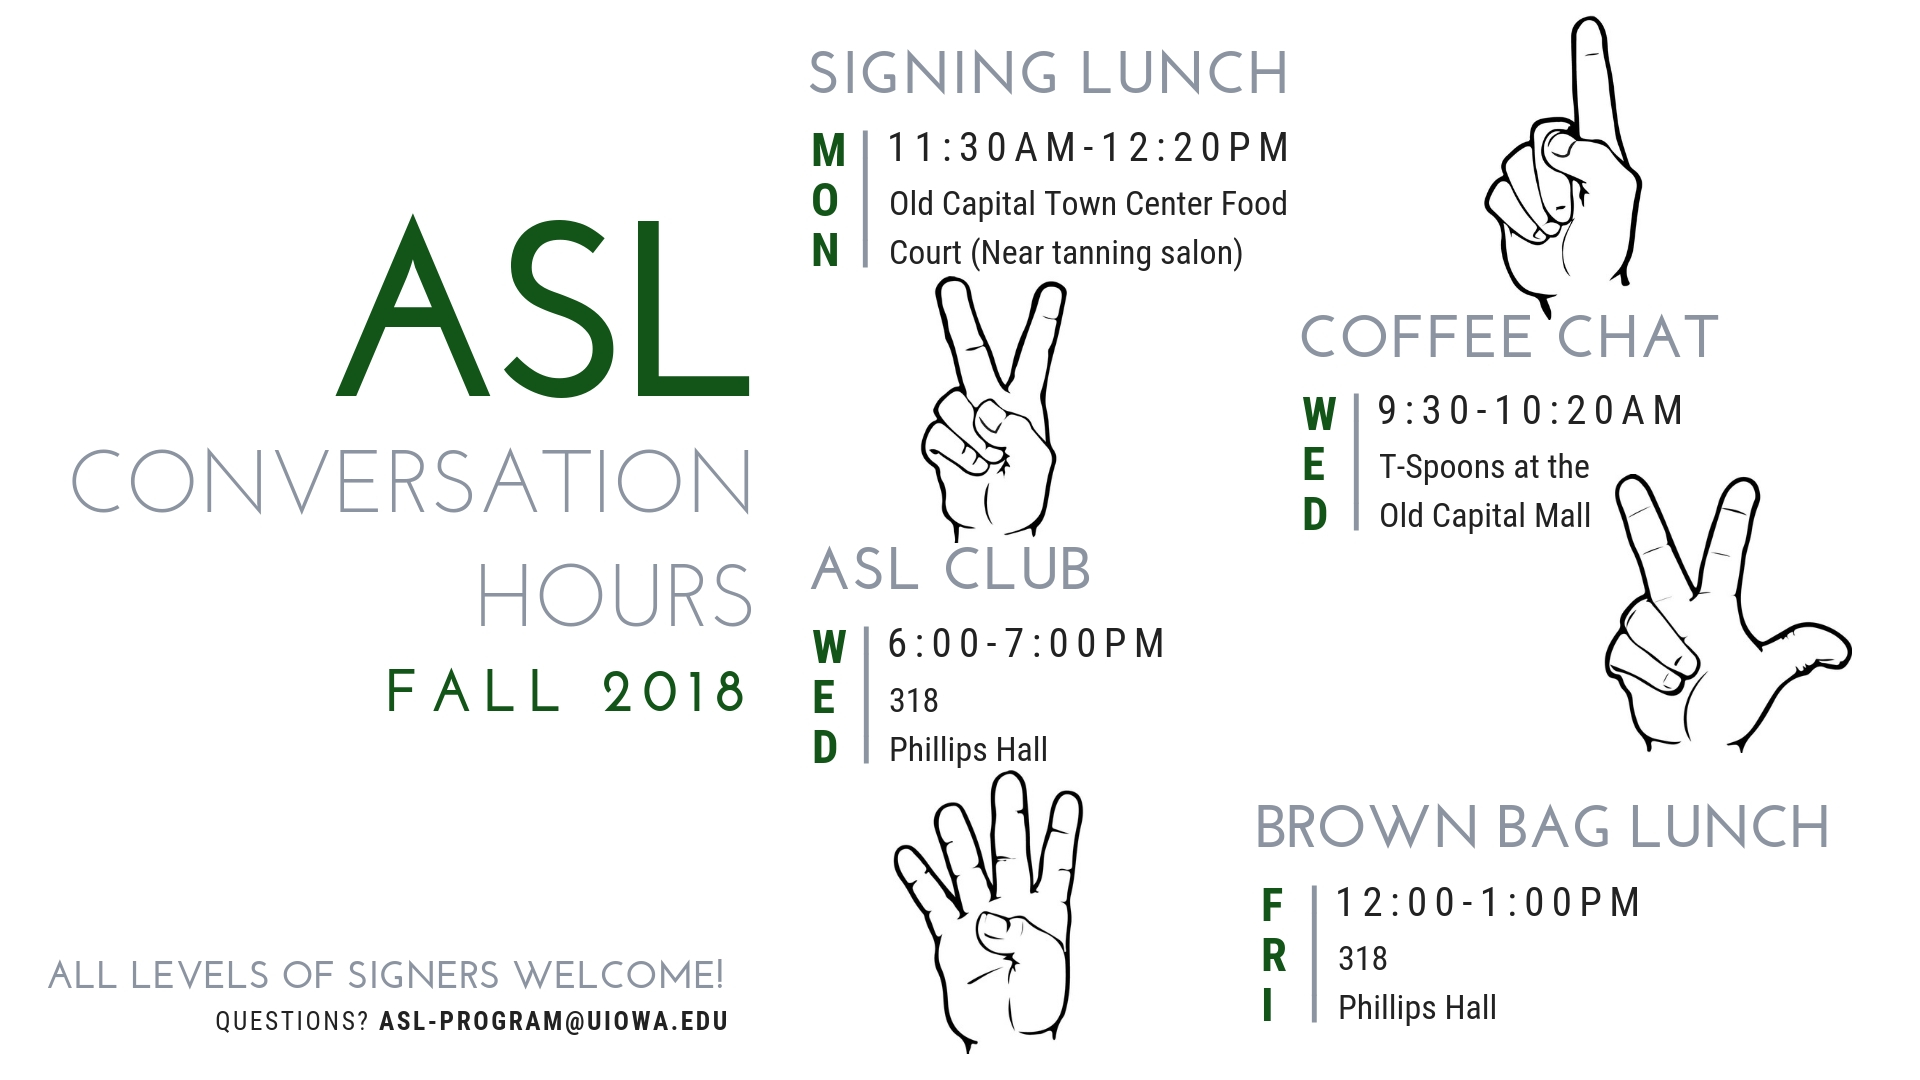 Weekly ASL Conversation Hours Schedule for Fall 2018  Mondays 11:30 a.m. to 12:20 p.m. Signing Lunch Old Capital Town Center food court (near the tanning salon.)  Wednesdays 9:30 a.m. to 10:20 a.m. Coffee Chat T-Spoons at the Old Capitol Mall  Wednesdays 6:00 p.m. to 7:00 p.m. ASL Club 318 Phillips Hall  Fridays 12:00 p.m. to 1:00 p.m. Brown Bag Lunch 318 Phillips Hall